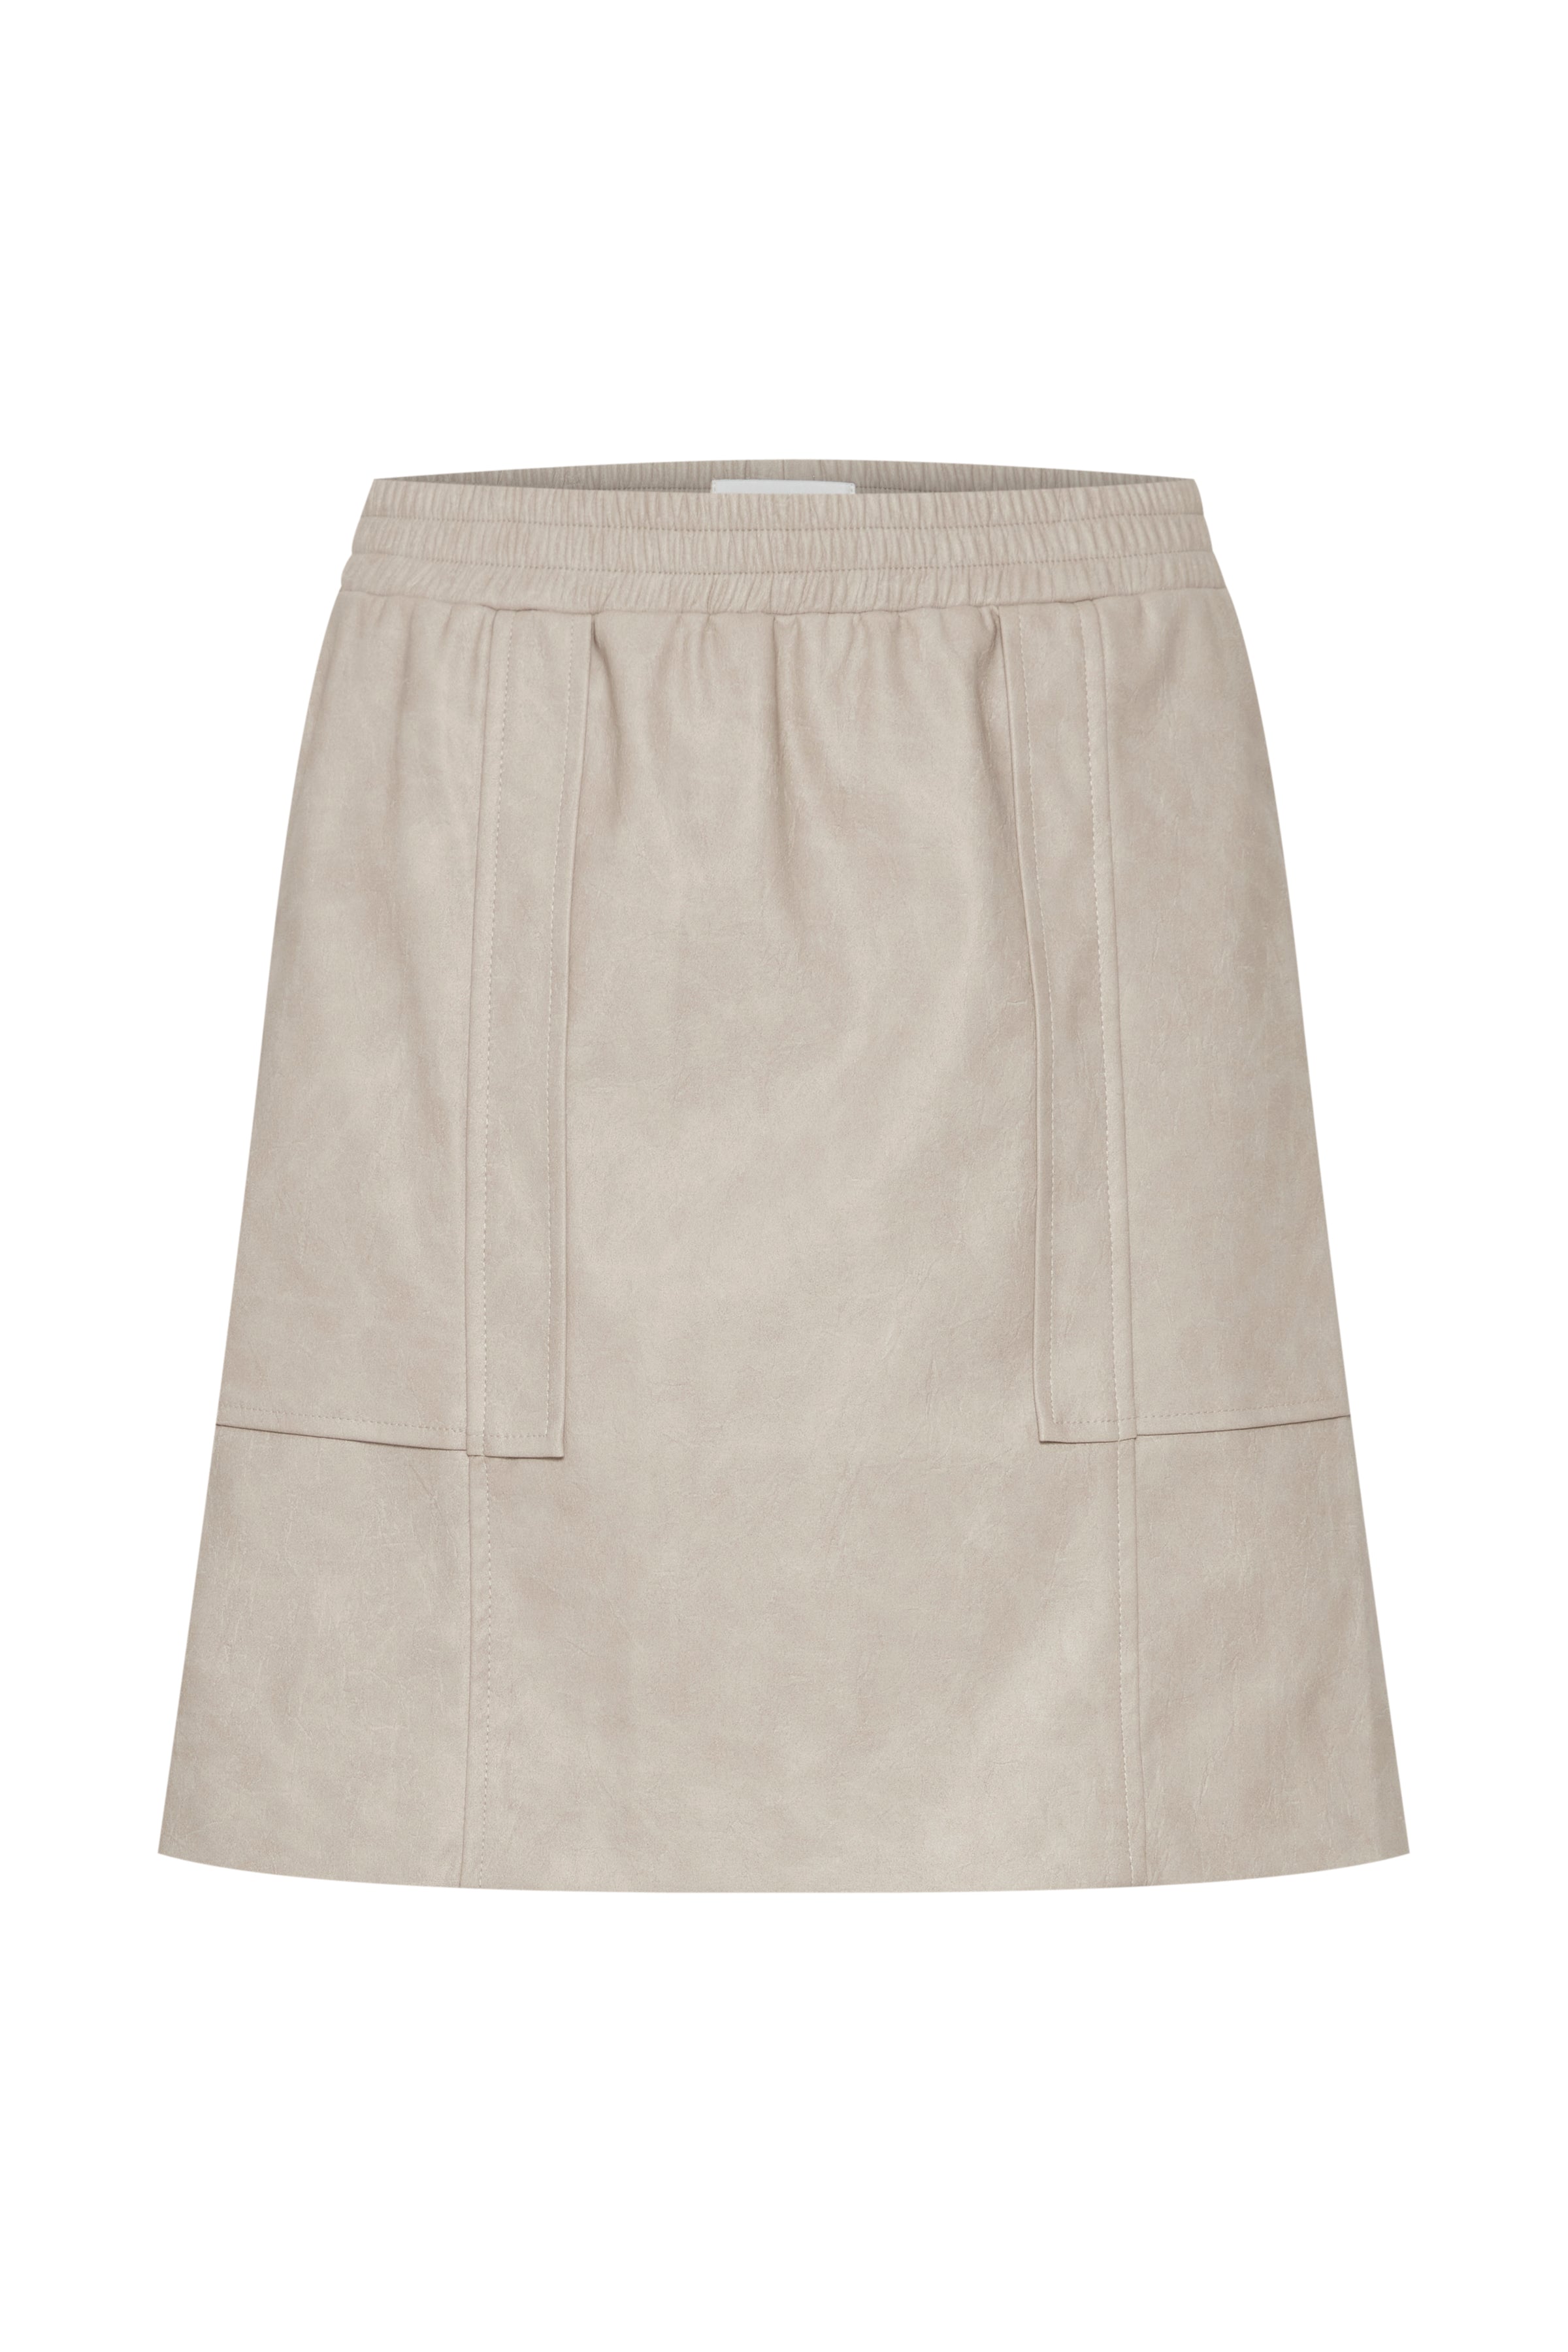 NOBI FAUX LEATHER SKIRT (FEATHER GREY)